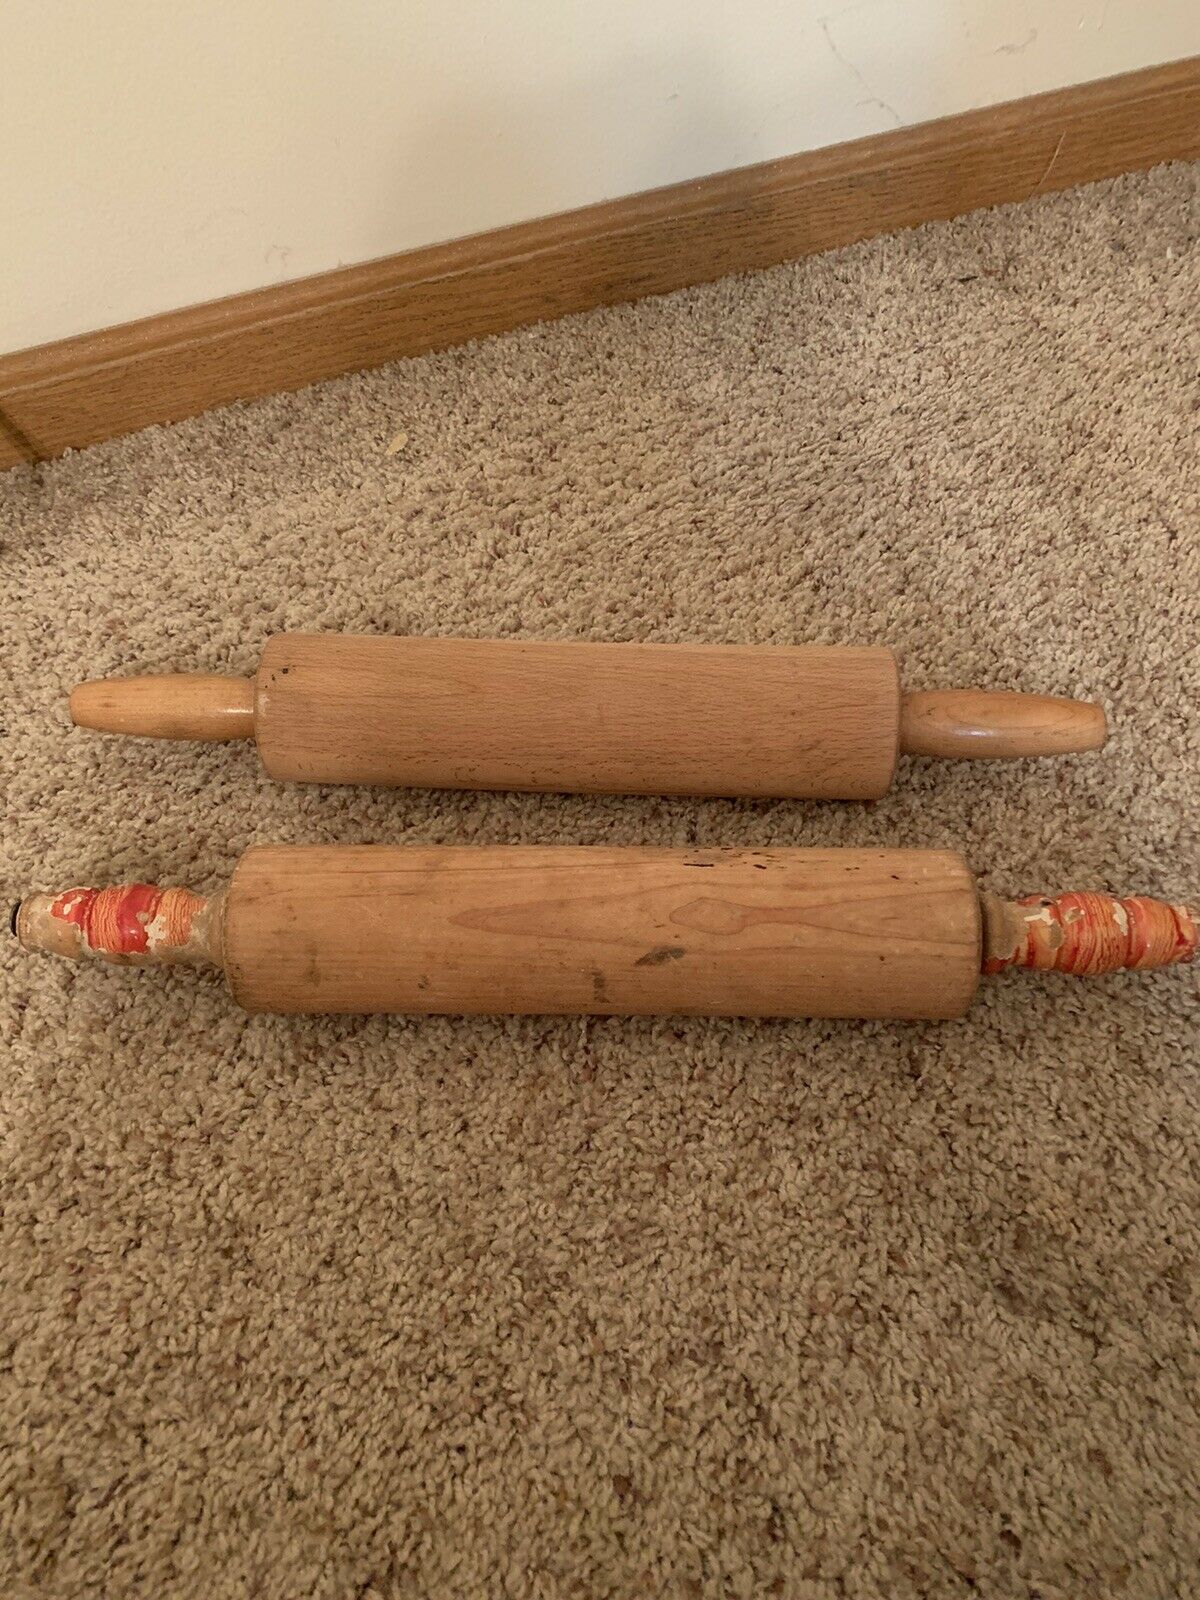 Vintage 2 Rolling Pins. 17” long. Vintage Condition